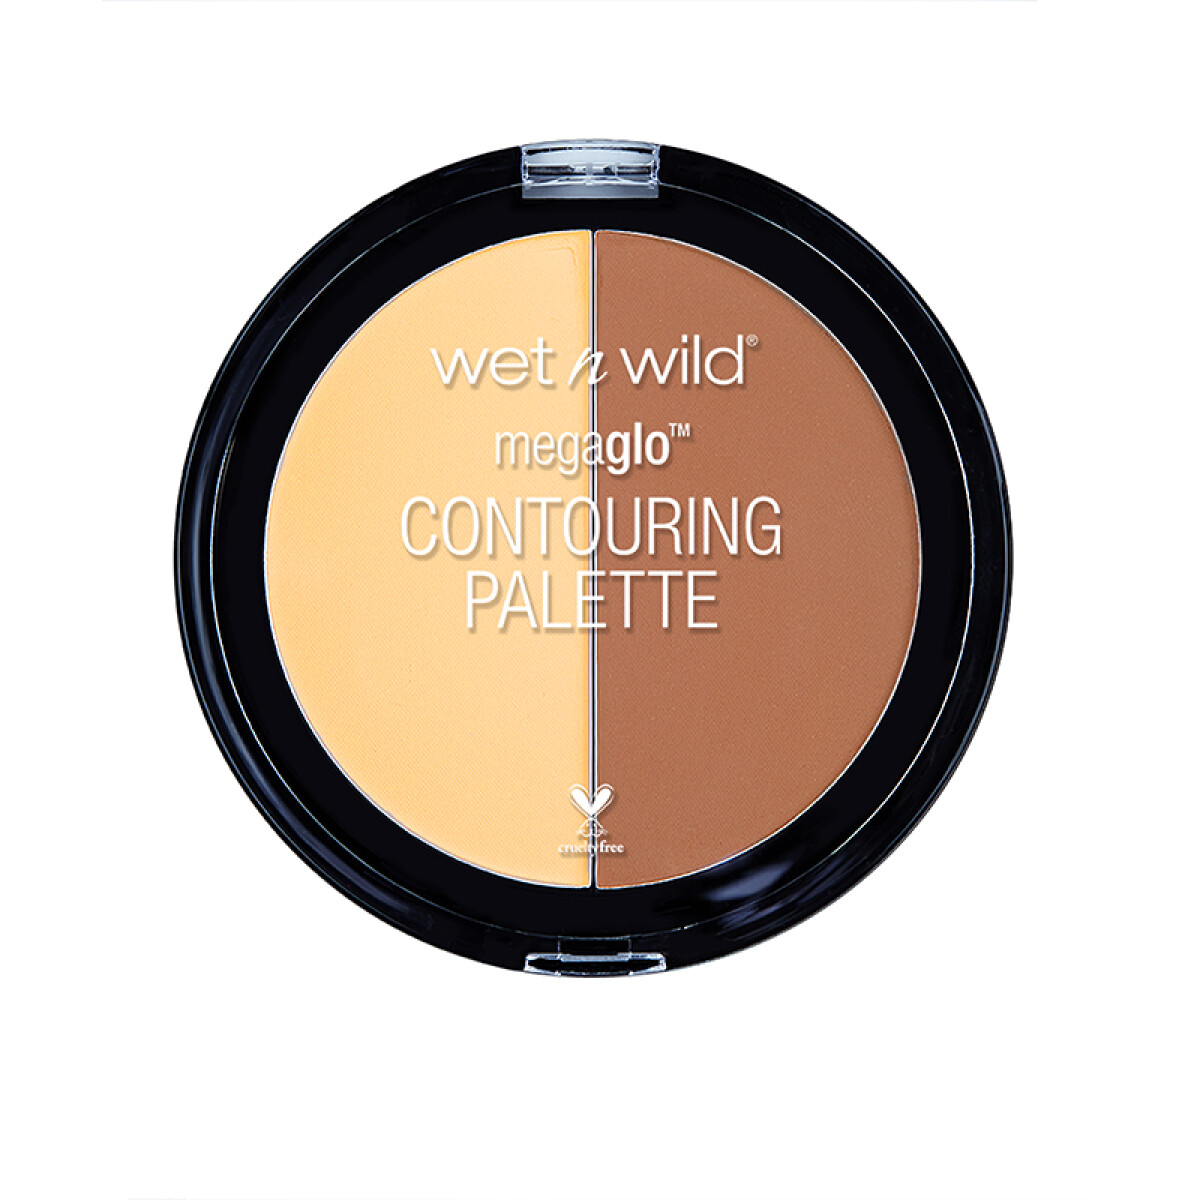 Wet N Wild Polvo Compacto Megaglow Contouring Palette Caramel Toffee 